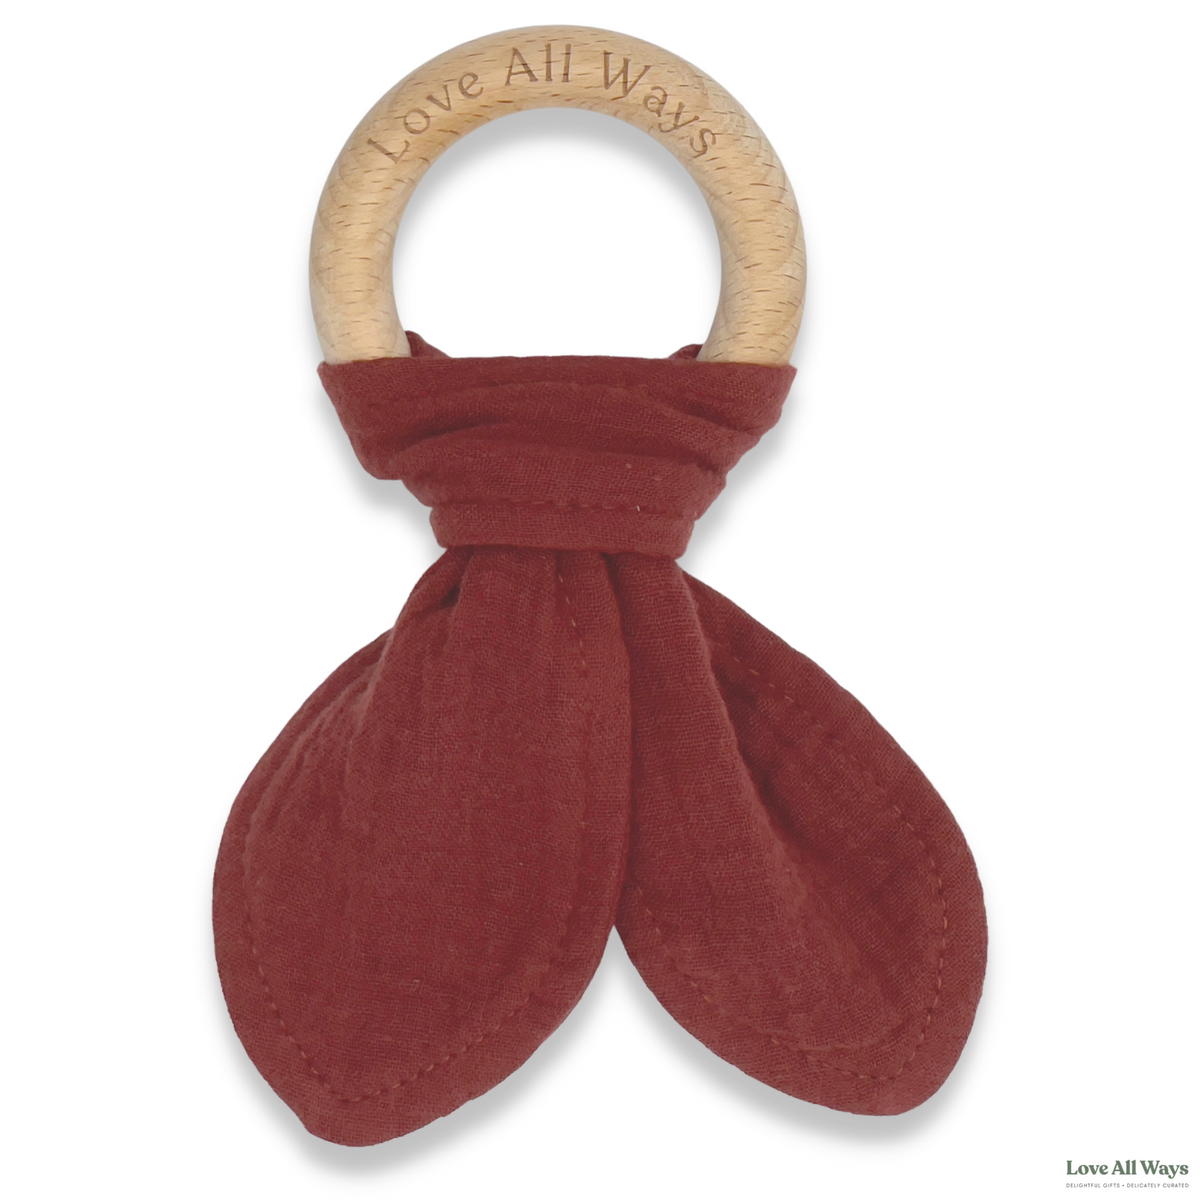 The Love All Ways beechwood organic cotton teether is a natural, eco friendly teether designed to stimulate gums and is a beautiful teething option to keep babies entertained. Made from a chemical free, non toxic natural beechwood that is safe for baby's mouth making it perfect for those sore gums and budding teeth. The finish is sanded and buffed to a smooth finish without the use of any varnishes or waxes